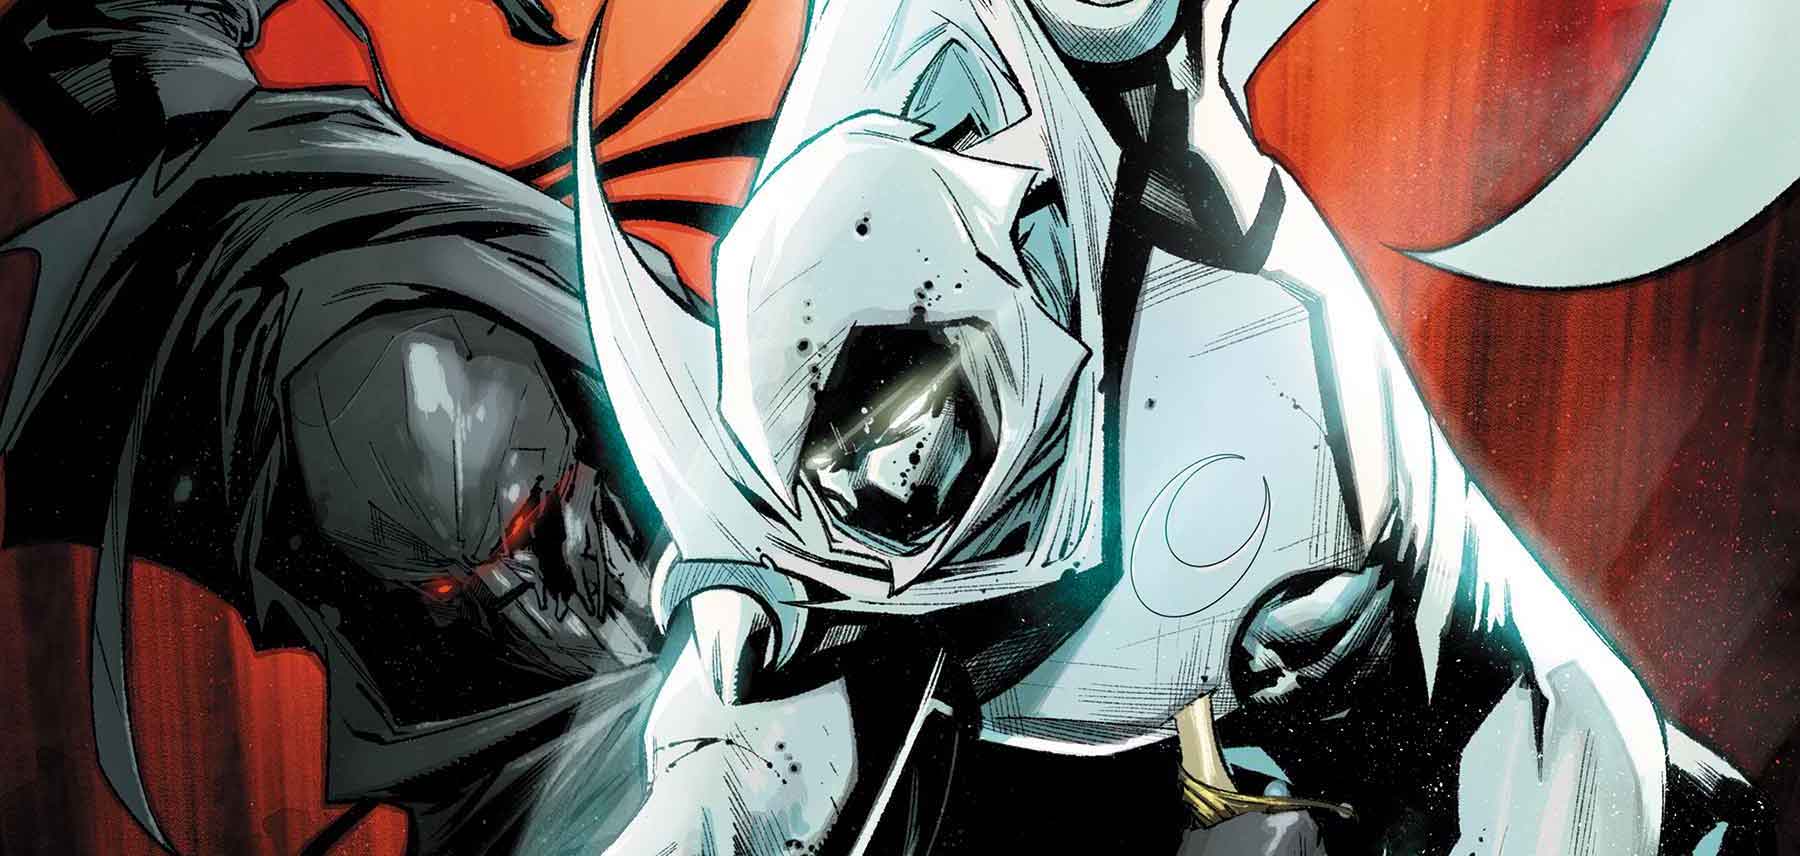 Midnight Mission vs. Black Spectre comes crashing in with 'Moon Knight' #29